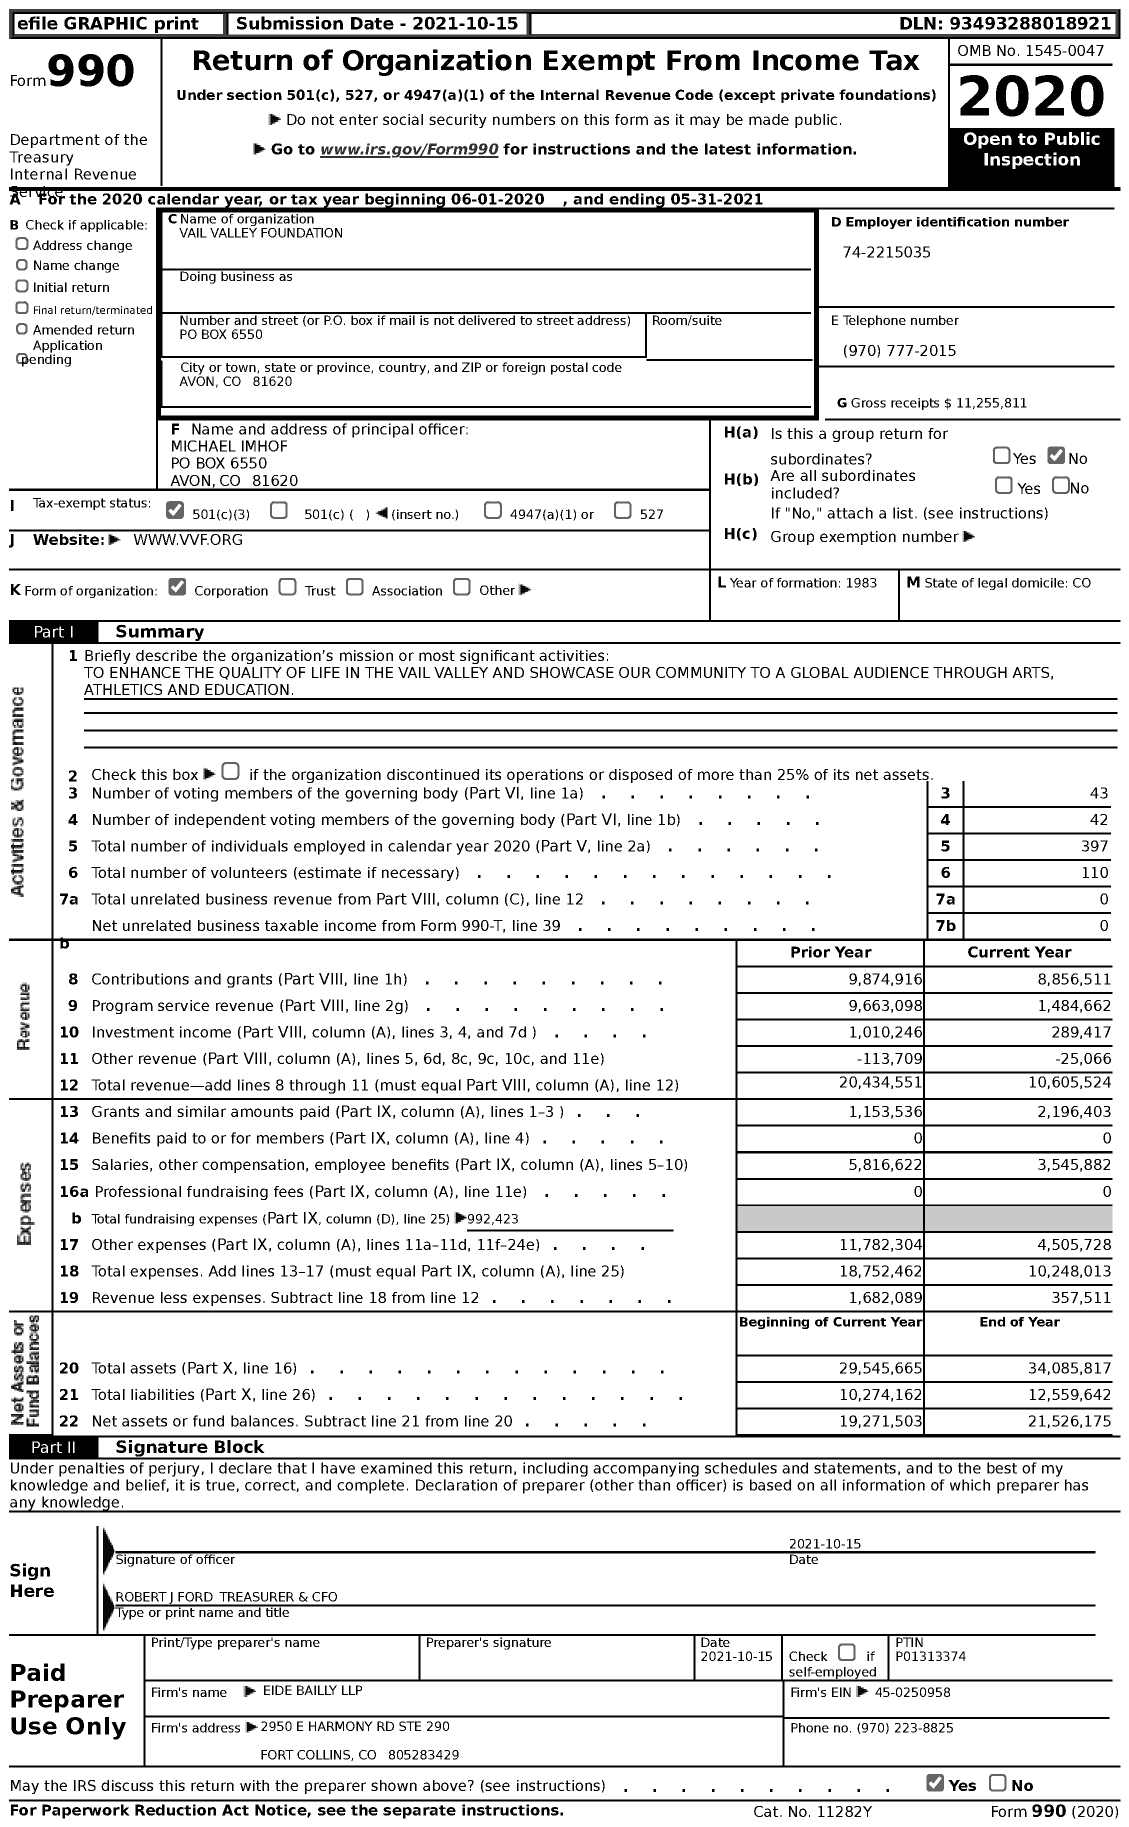 Image of first page of 2020 Form 990 for Vail Valley Foundation (VVF)